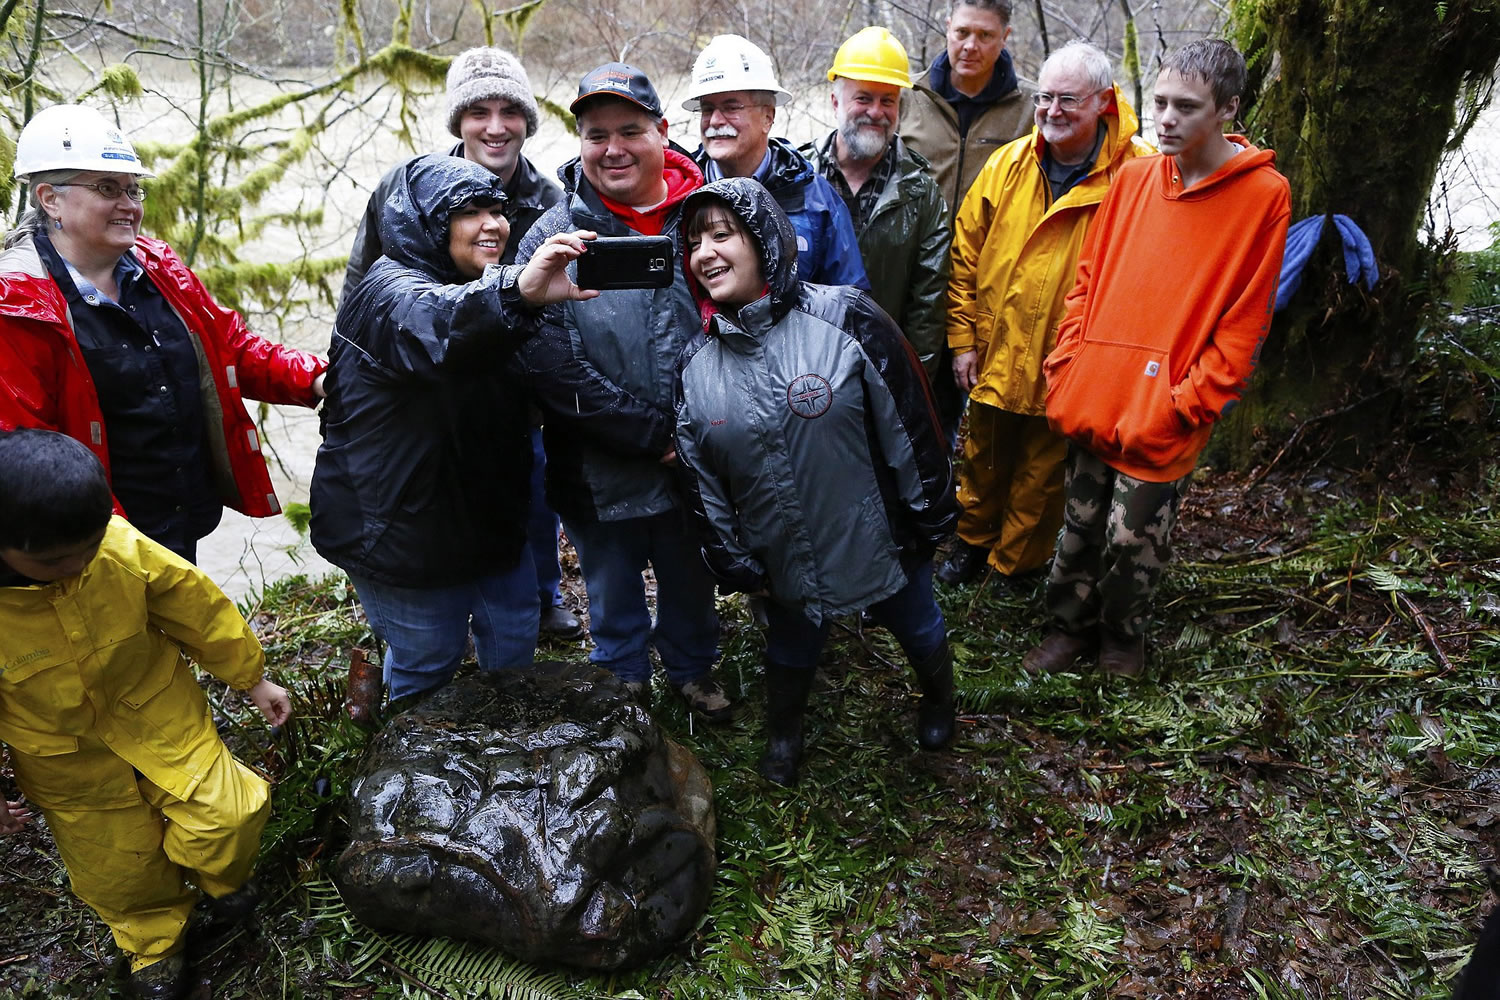 Tribal members and state archaeologists pose for a selfie after a ceremony to celebrate the discovery of a rock that appears to be a carving that depicts a legendary battle in Quileute mythology.